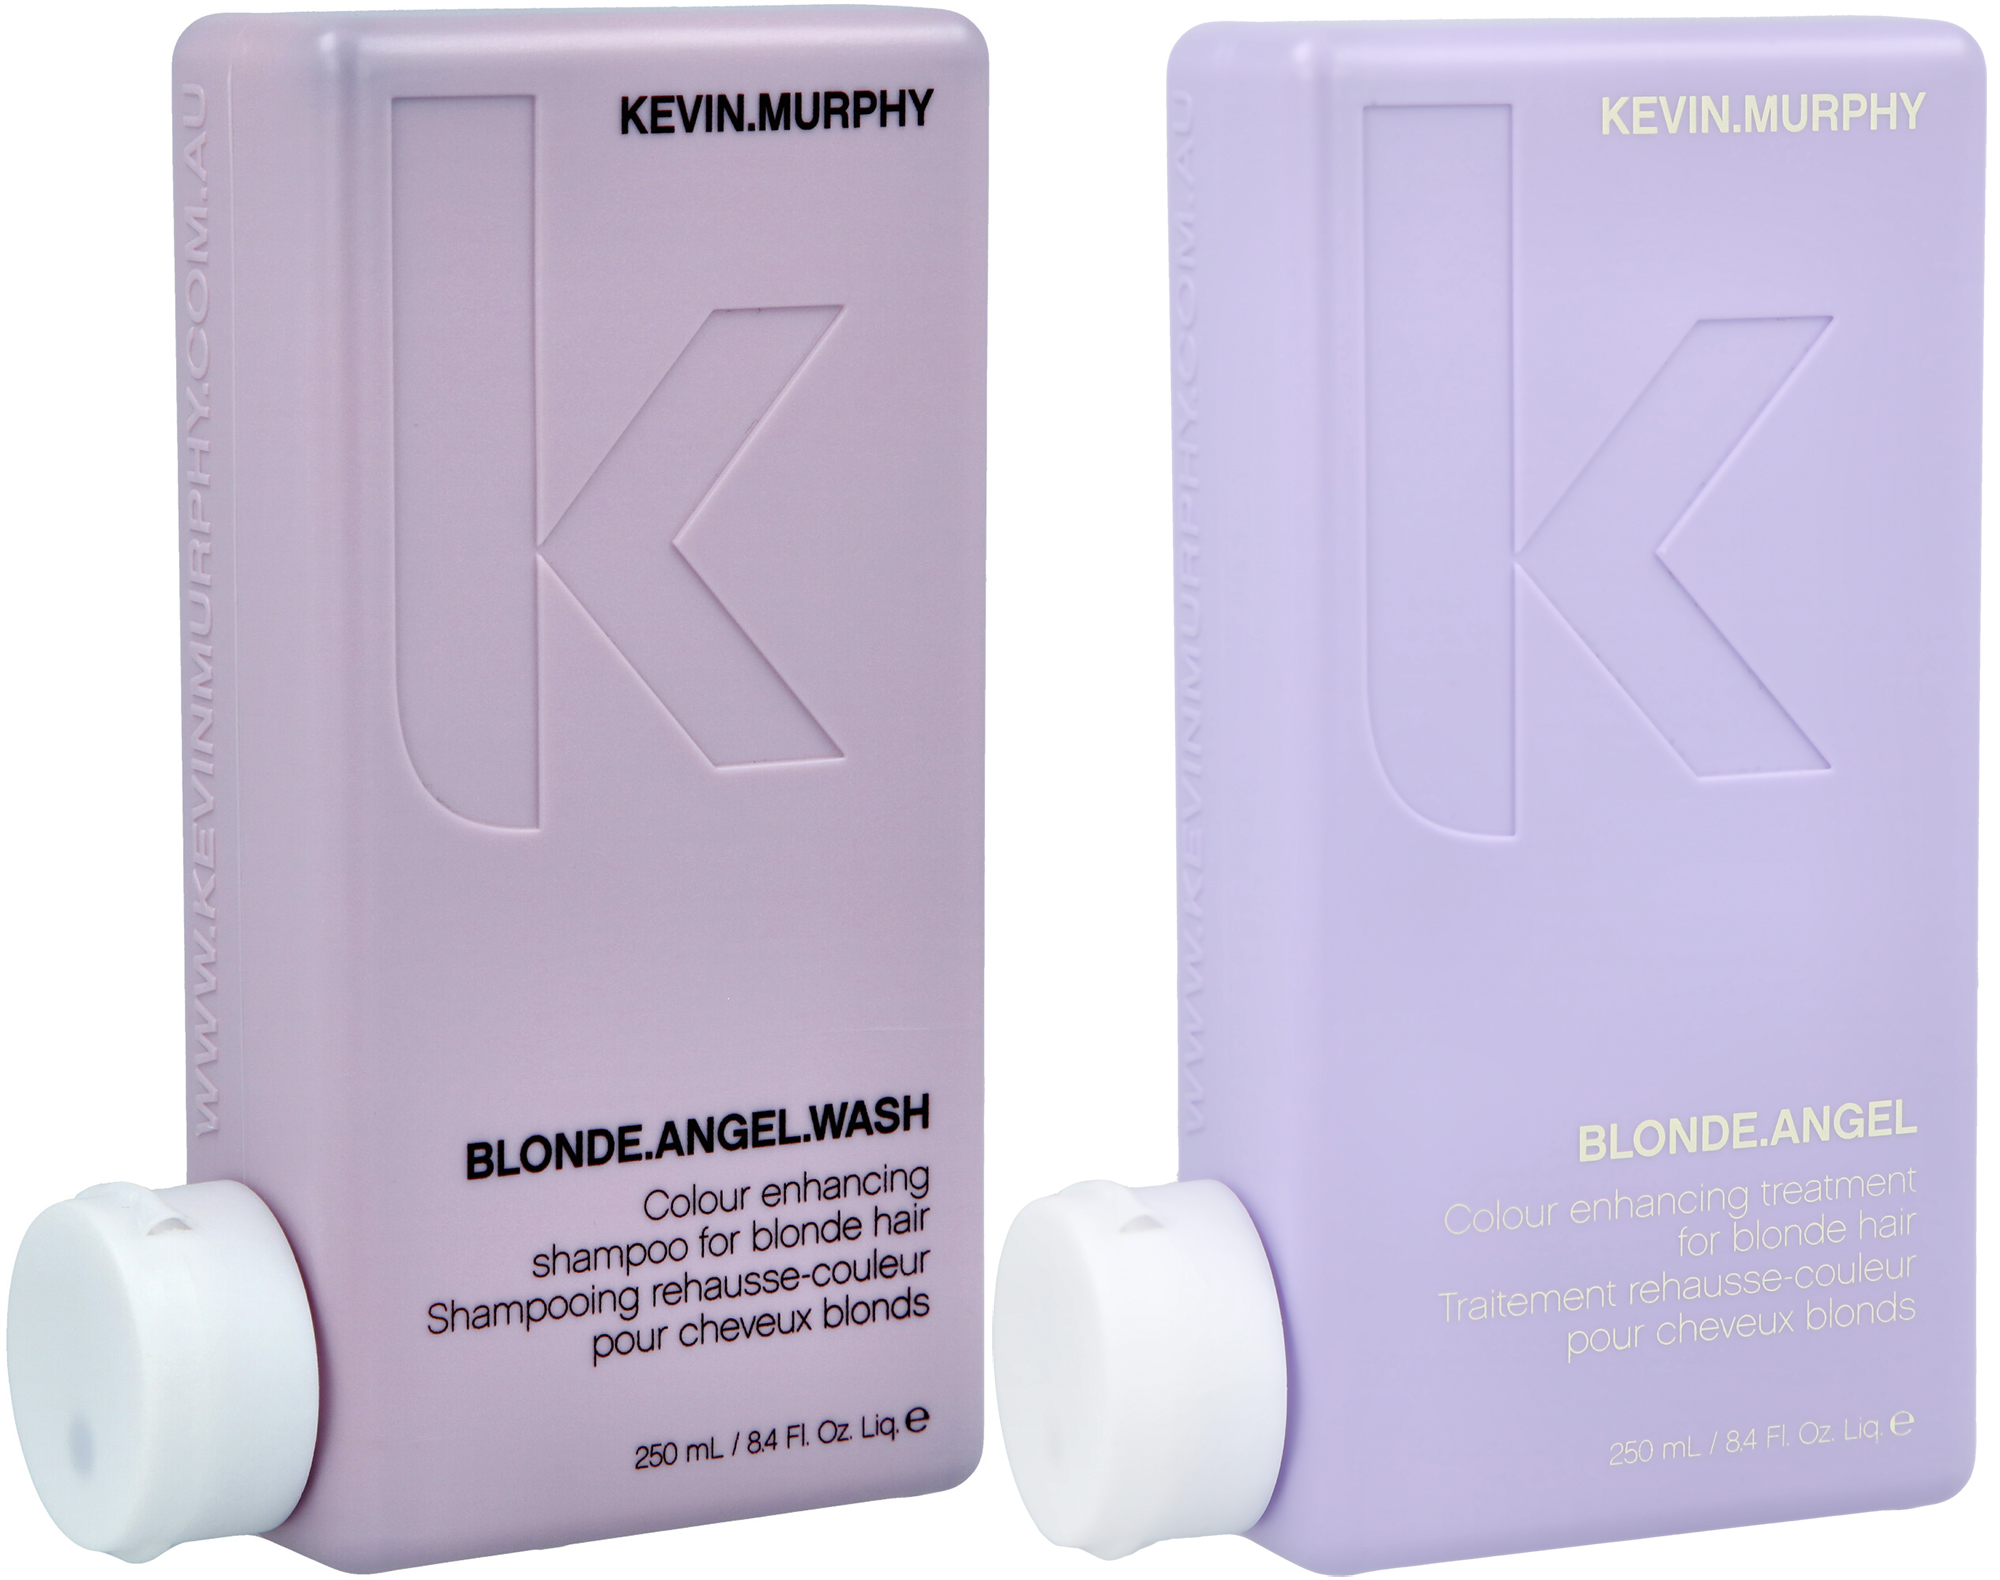 7. "Blonde Angel Treatment" by Kevin Murphy - wide 6